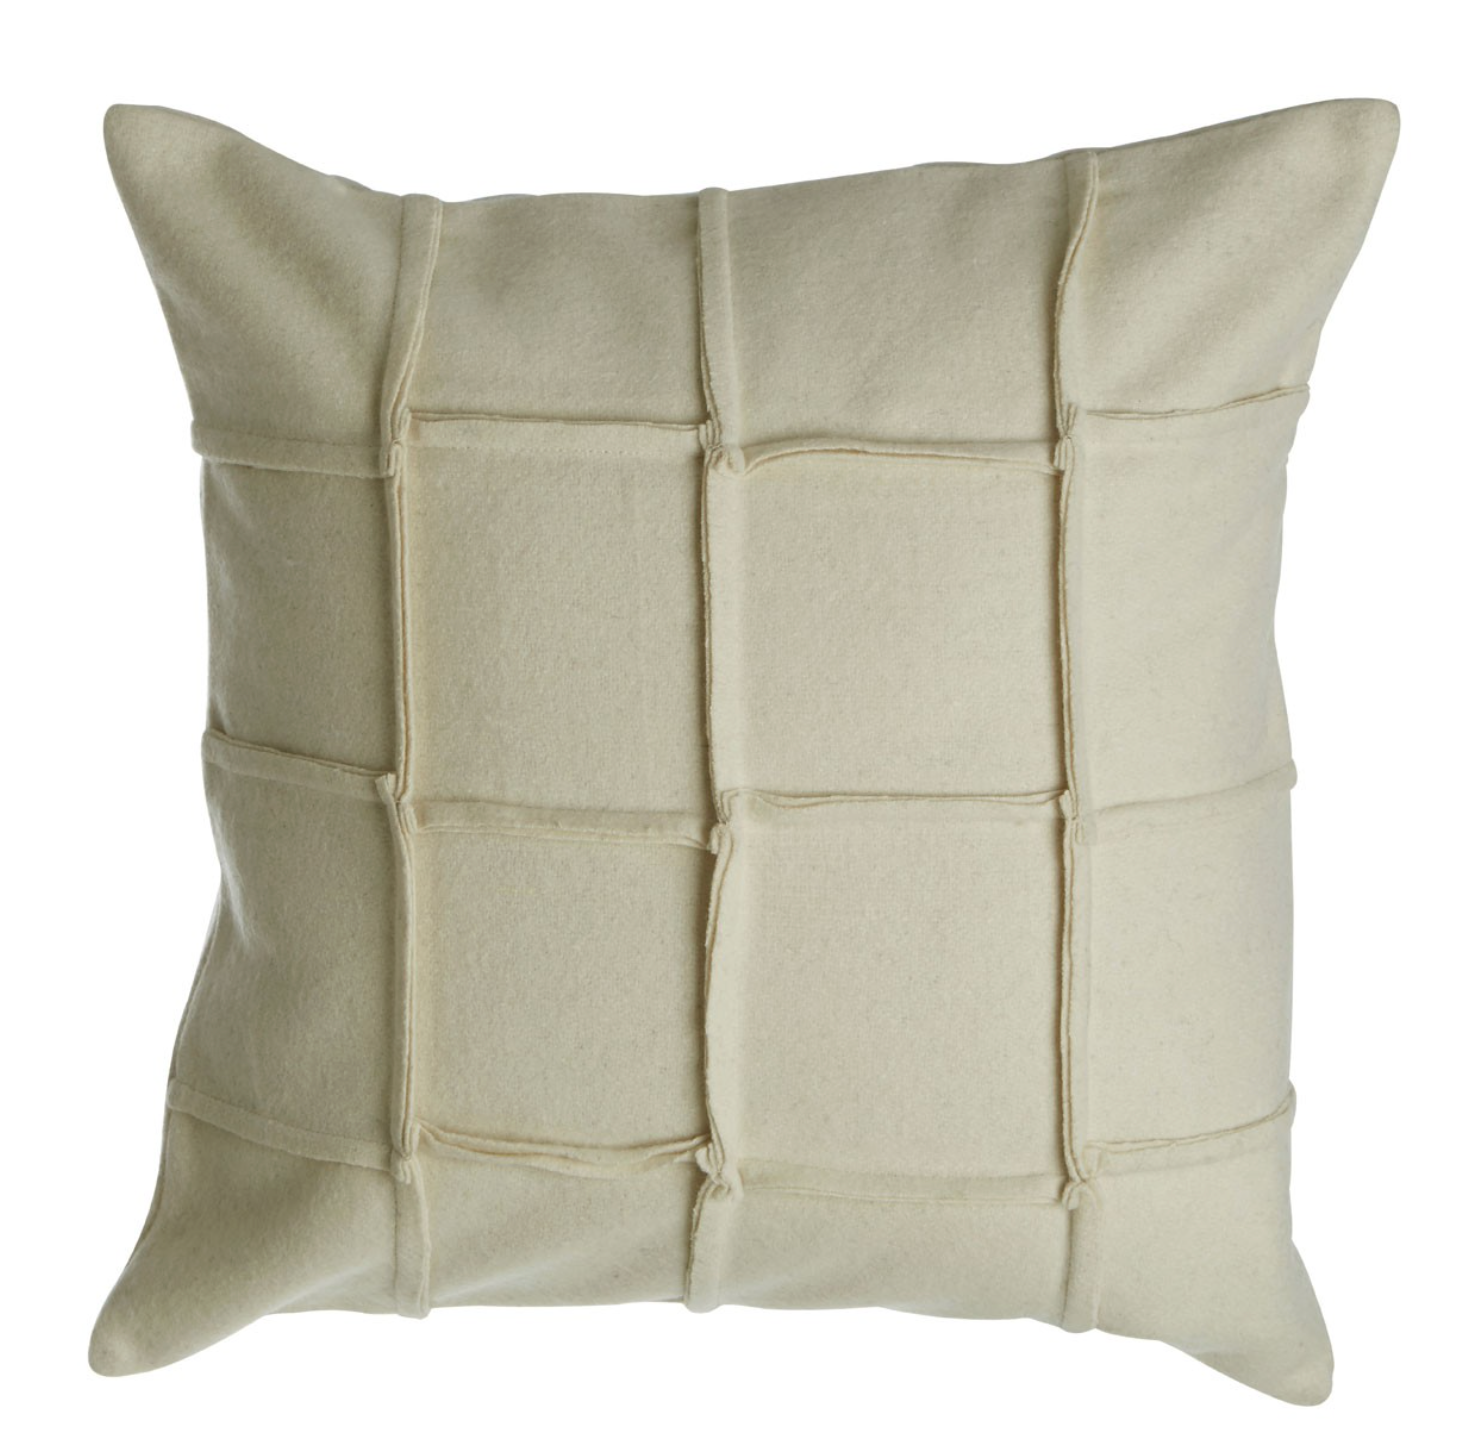 Cream Wool Mix Cushion - Outlet - Save 20%